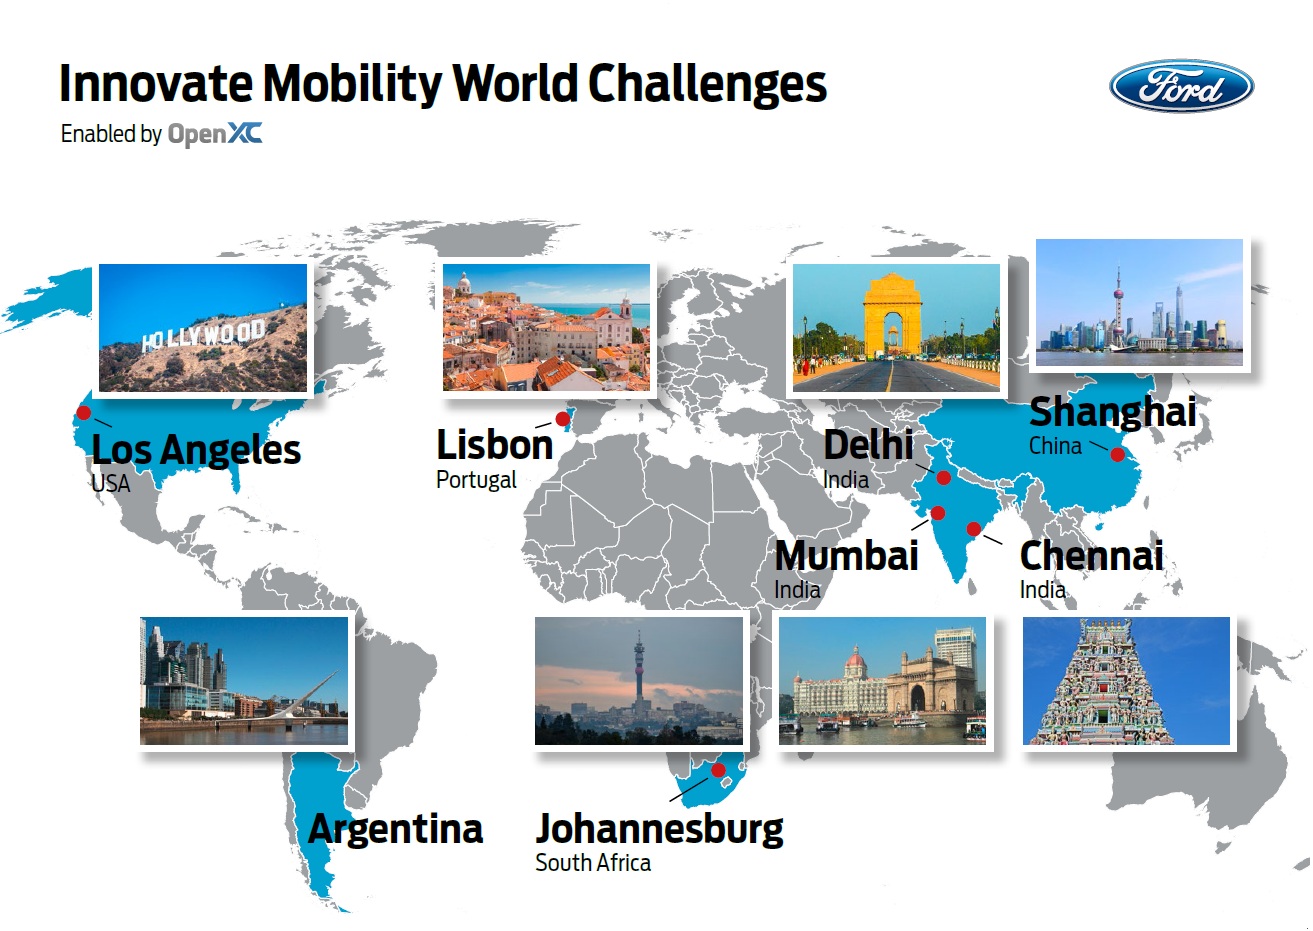 Ford_Innovate Mobility World Challenges_mapa